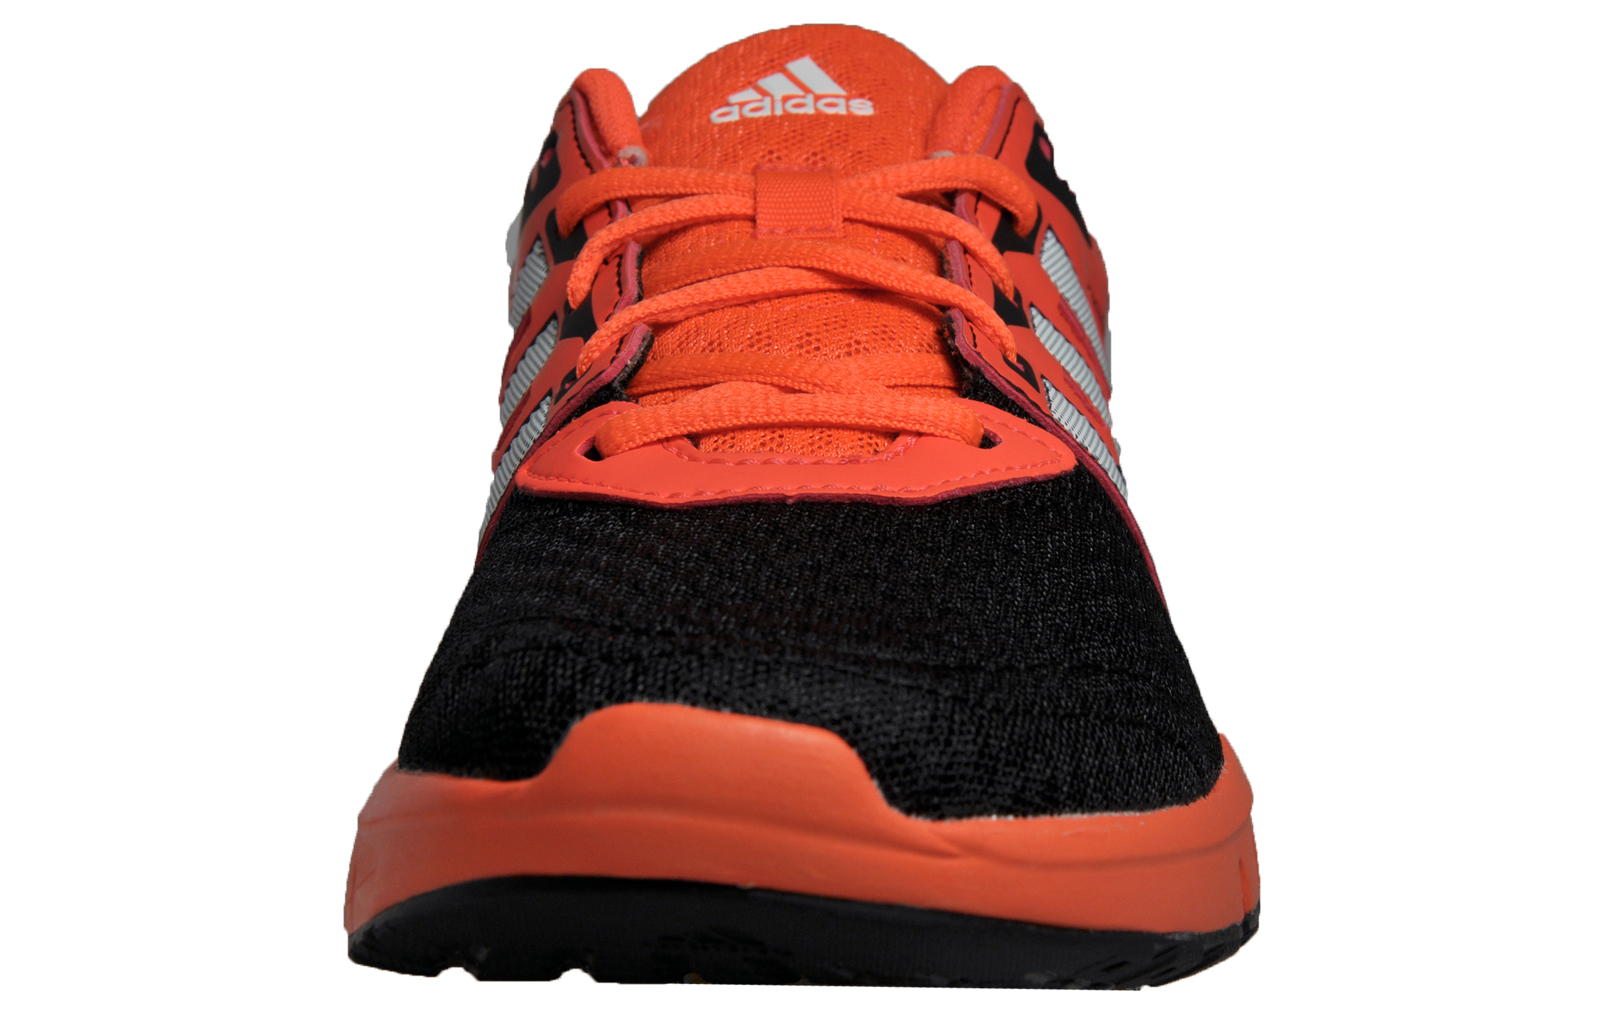 Adidas Galaxy 2 Mens Running Shoes Fitness Gym Workout Trainers Orange ...